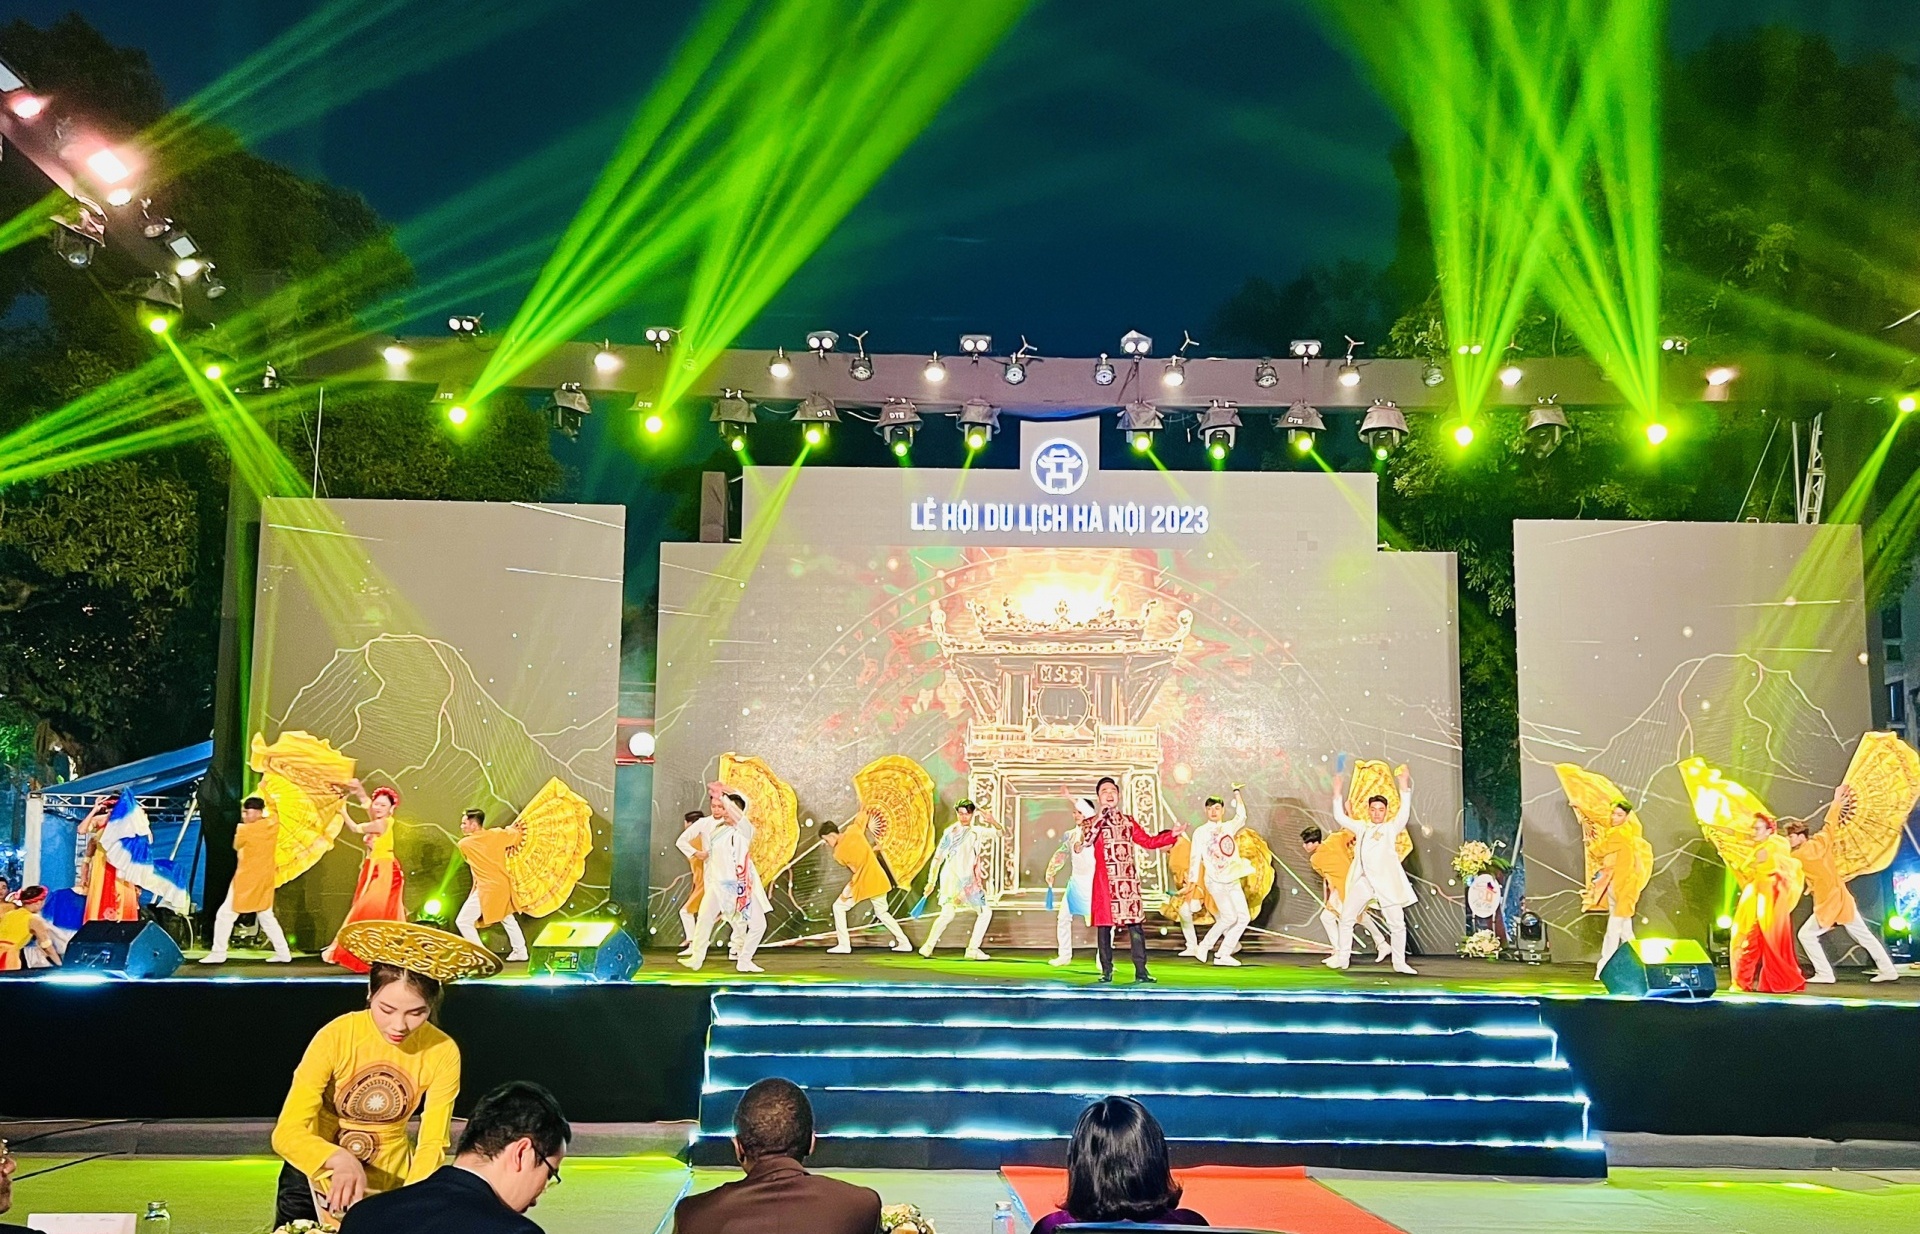 Attractive products shine at Hanoi Tourism Festival 2023